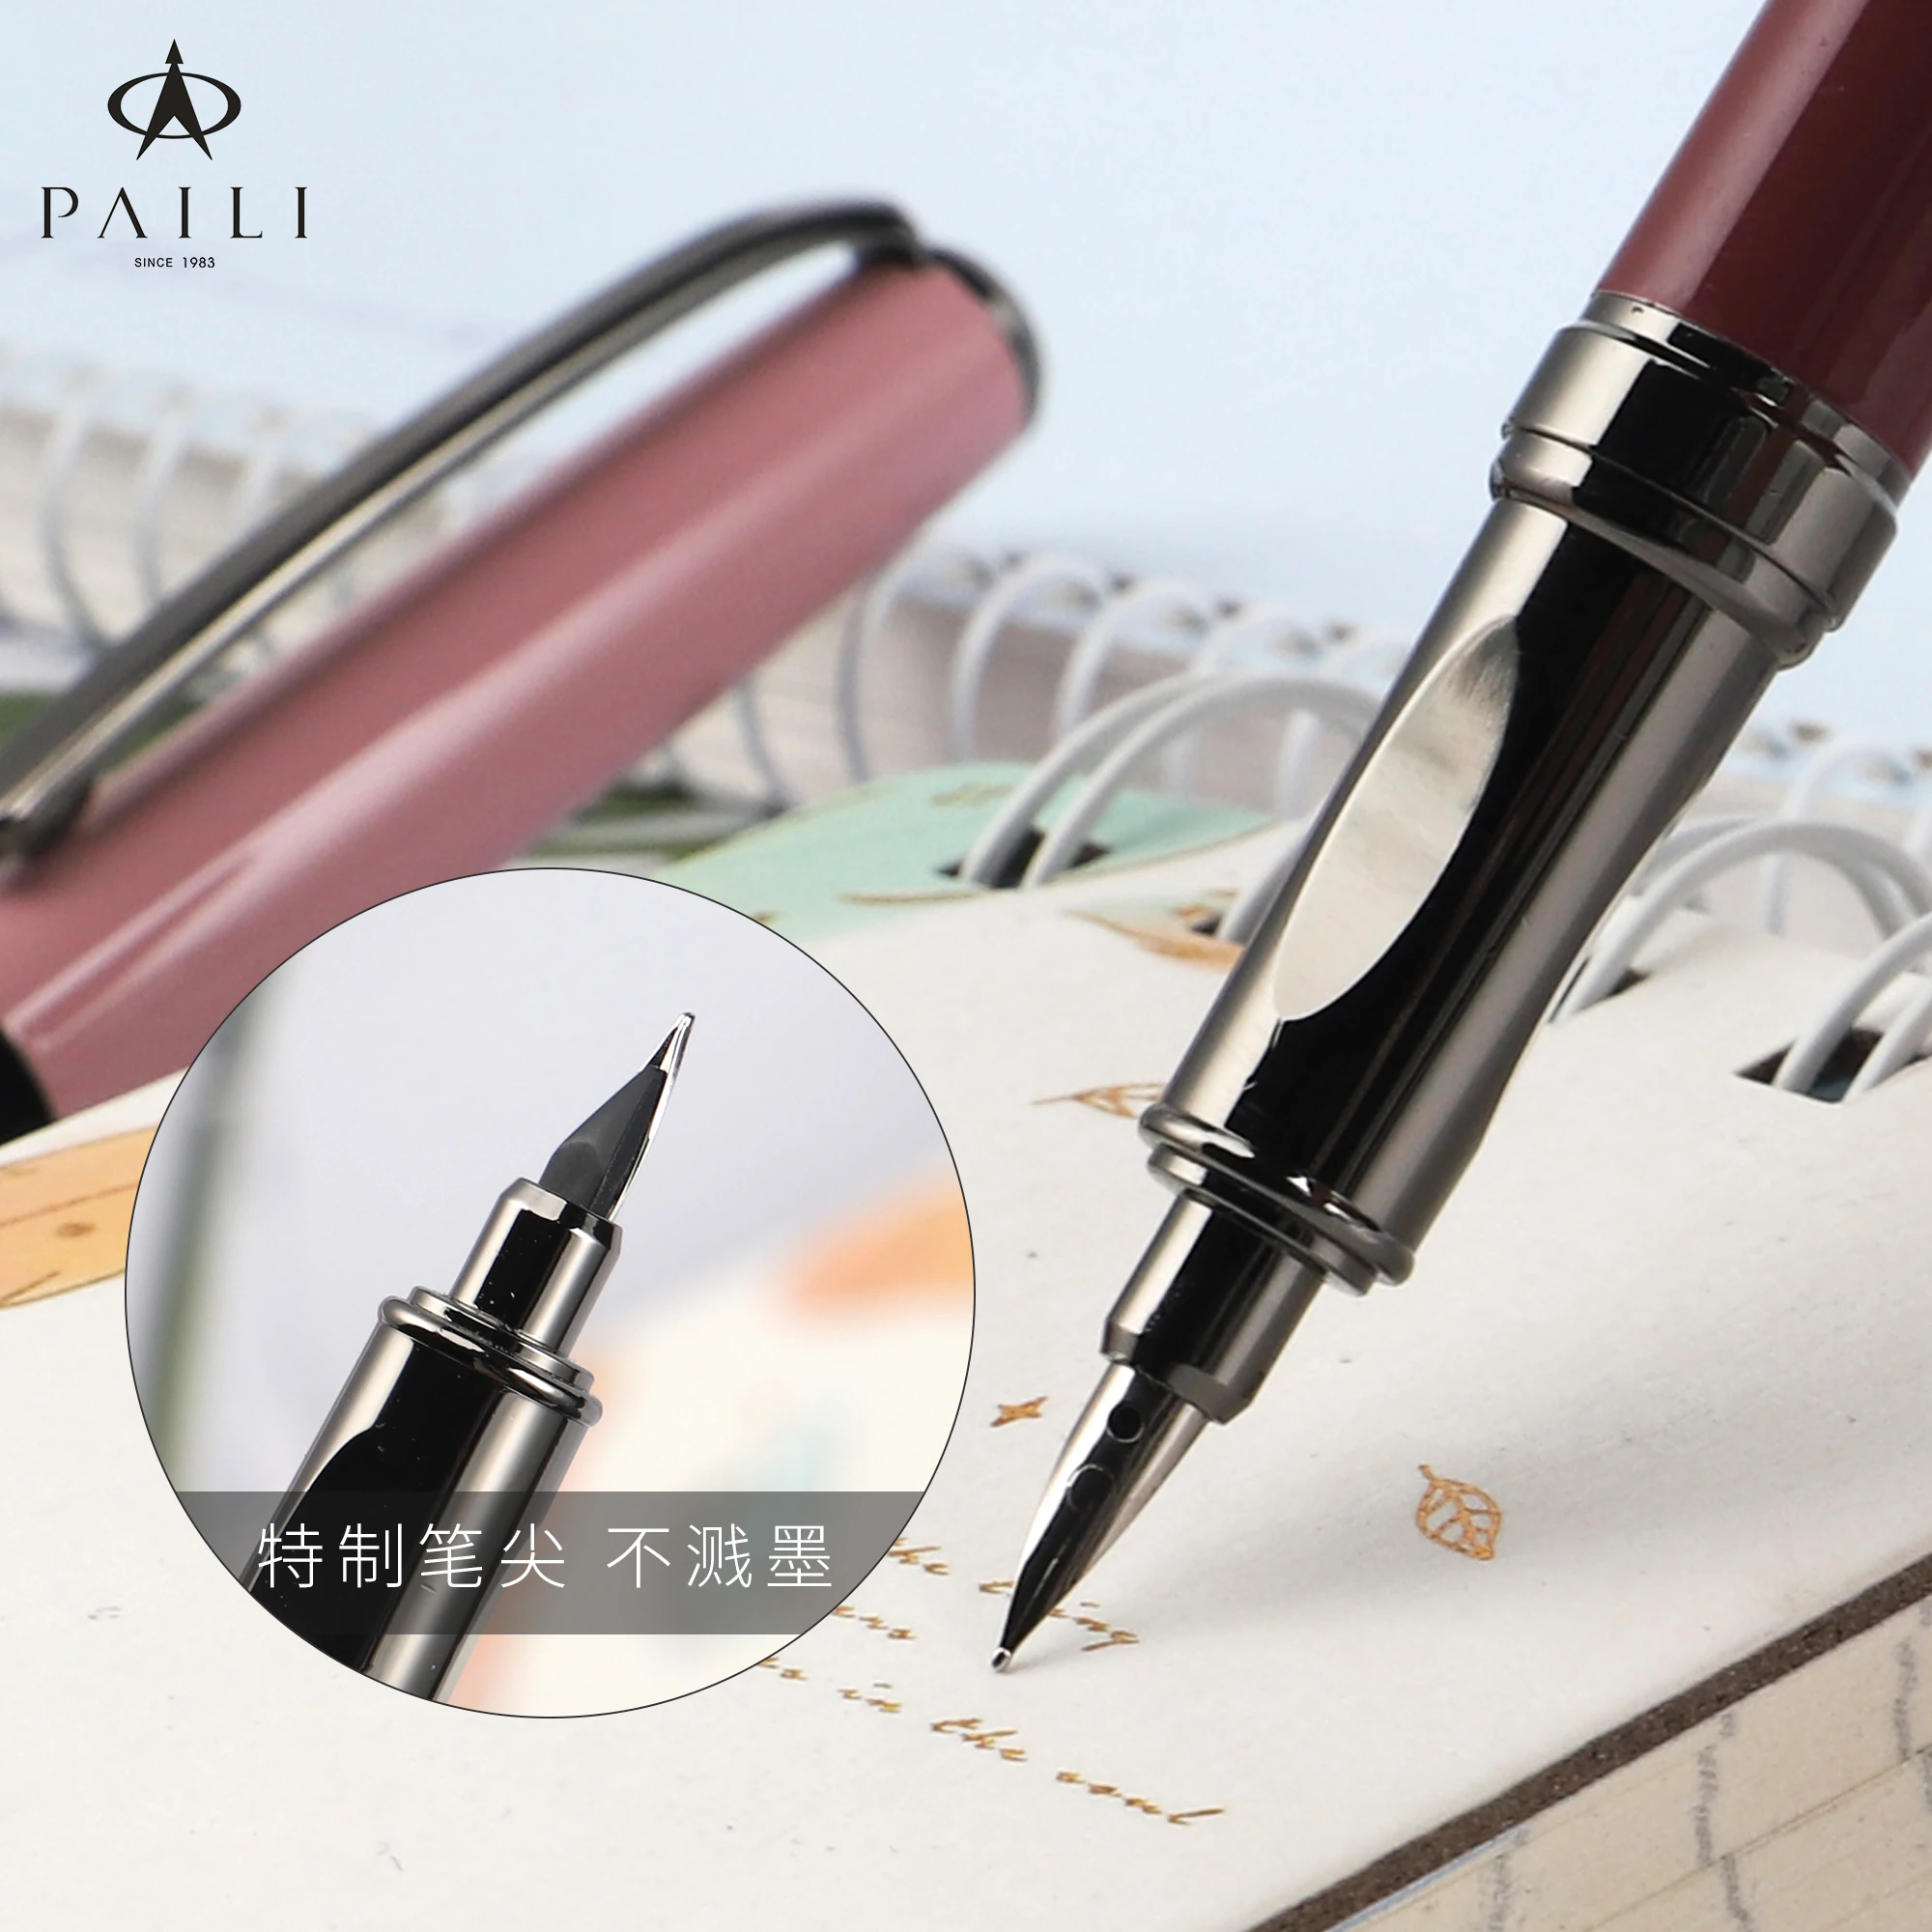 PAILI 5016 Metal Ink Fountain Pen Super Fine Pen Nib 0.38mm Red Black Blue White Optional for Financial Business Free Shipping